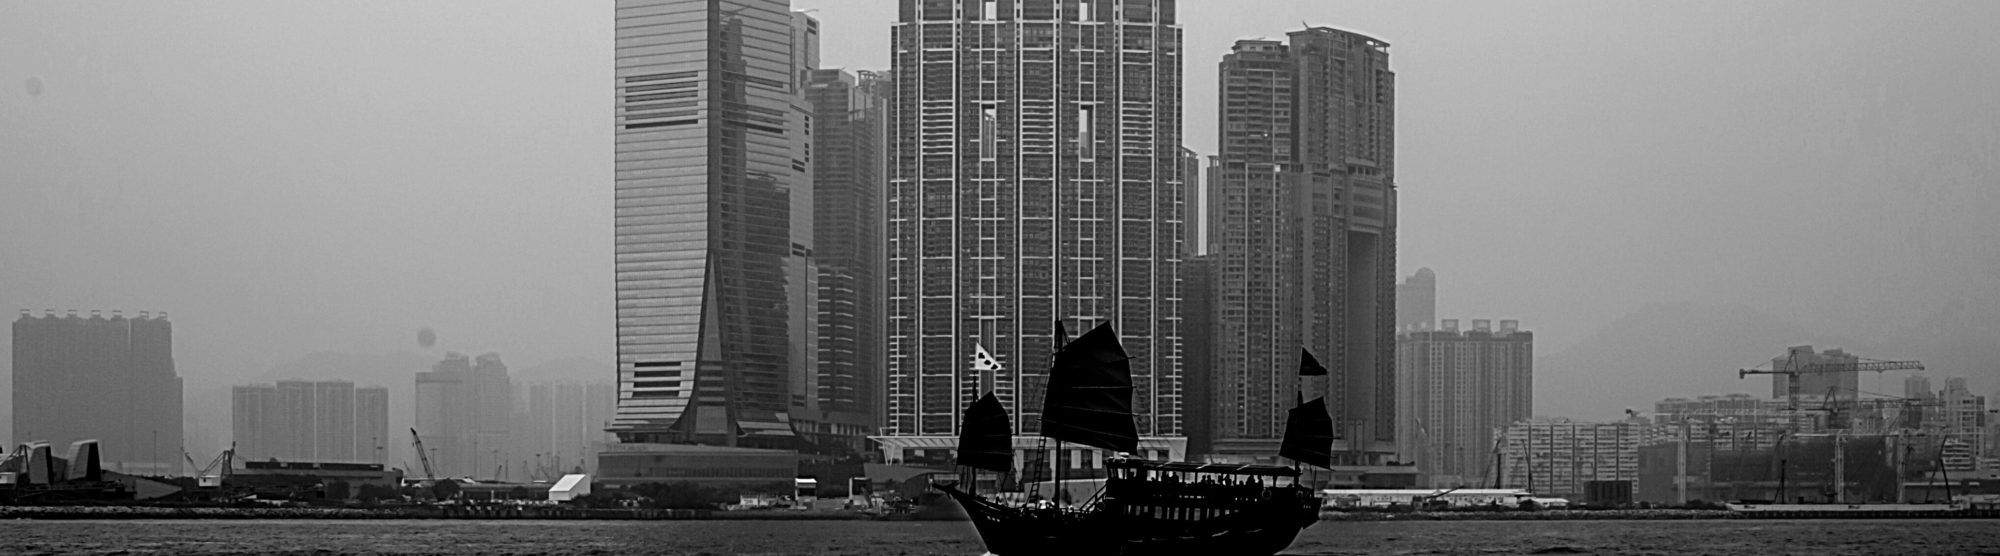 beautiful image of a Chinese city on the water, a traditional boat floats in front of the modern buildings. A metaphor for netTerrain's traditional quality amid ongoing modernizations